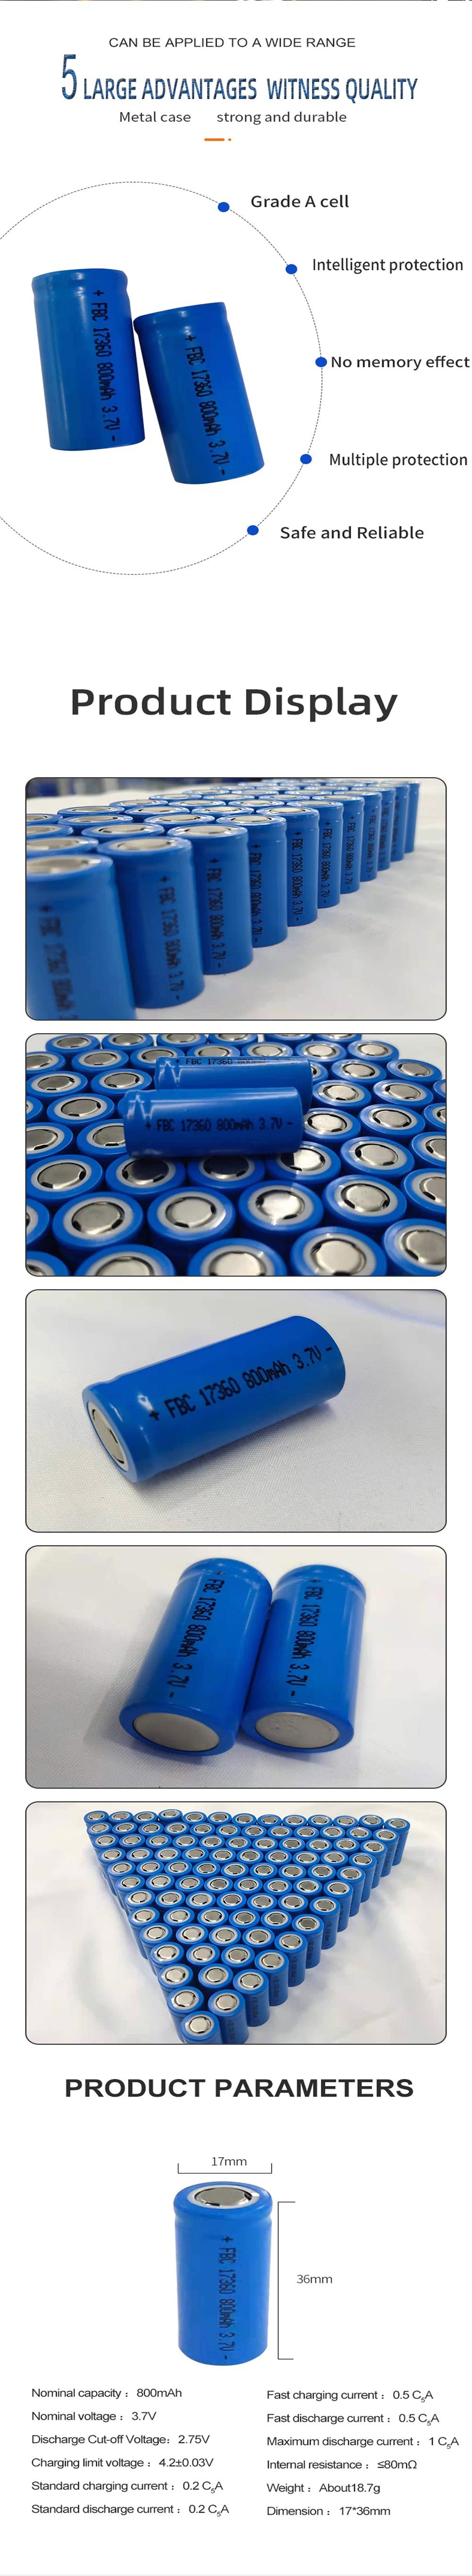 Special Shaped Single Rechargeable Lithium Battery Cell 17360 800mAh for All Kinds of Car Models, Aircraft Models, Toy Remote Controls